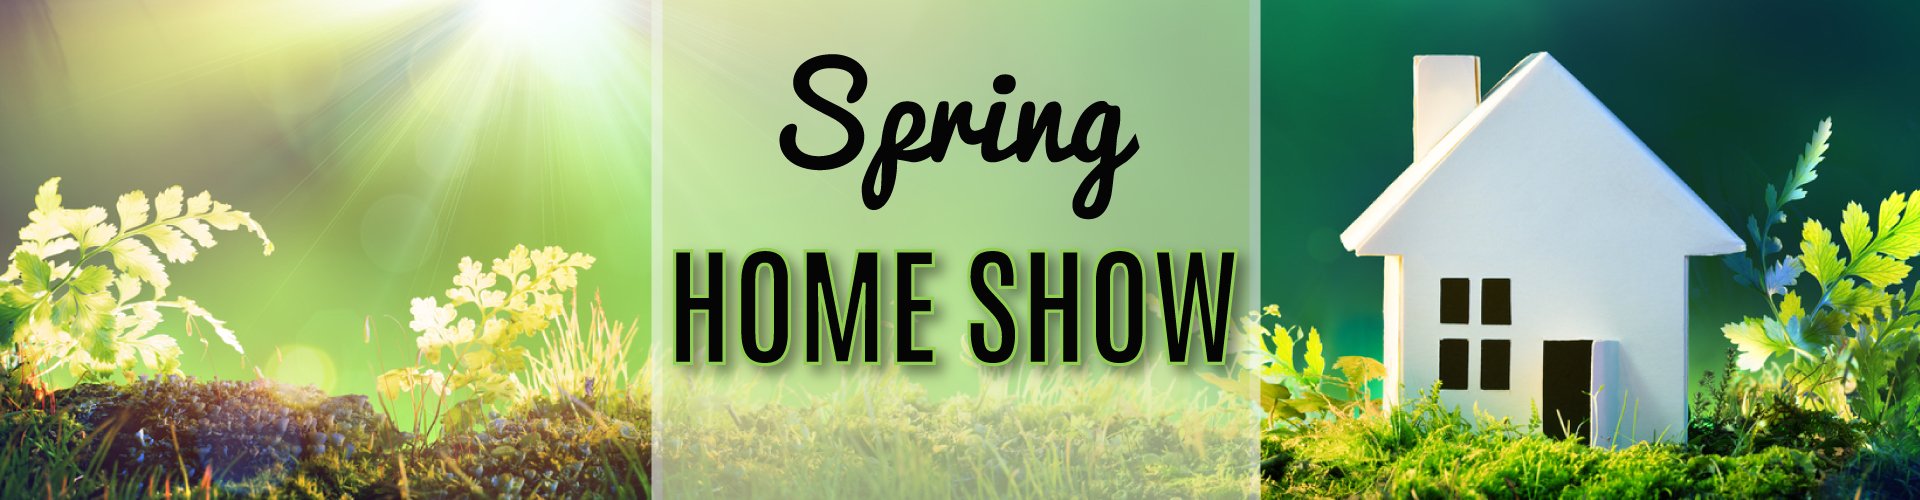 Hartford Convention Center – Jenks Productions CT Home Show - Spring 2018